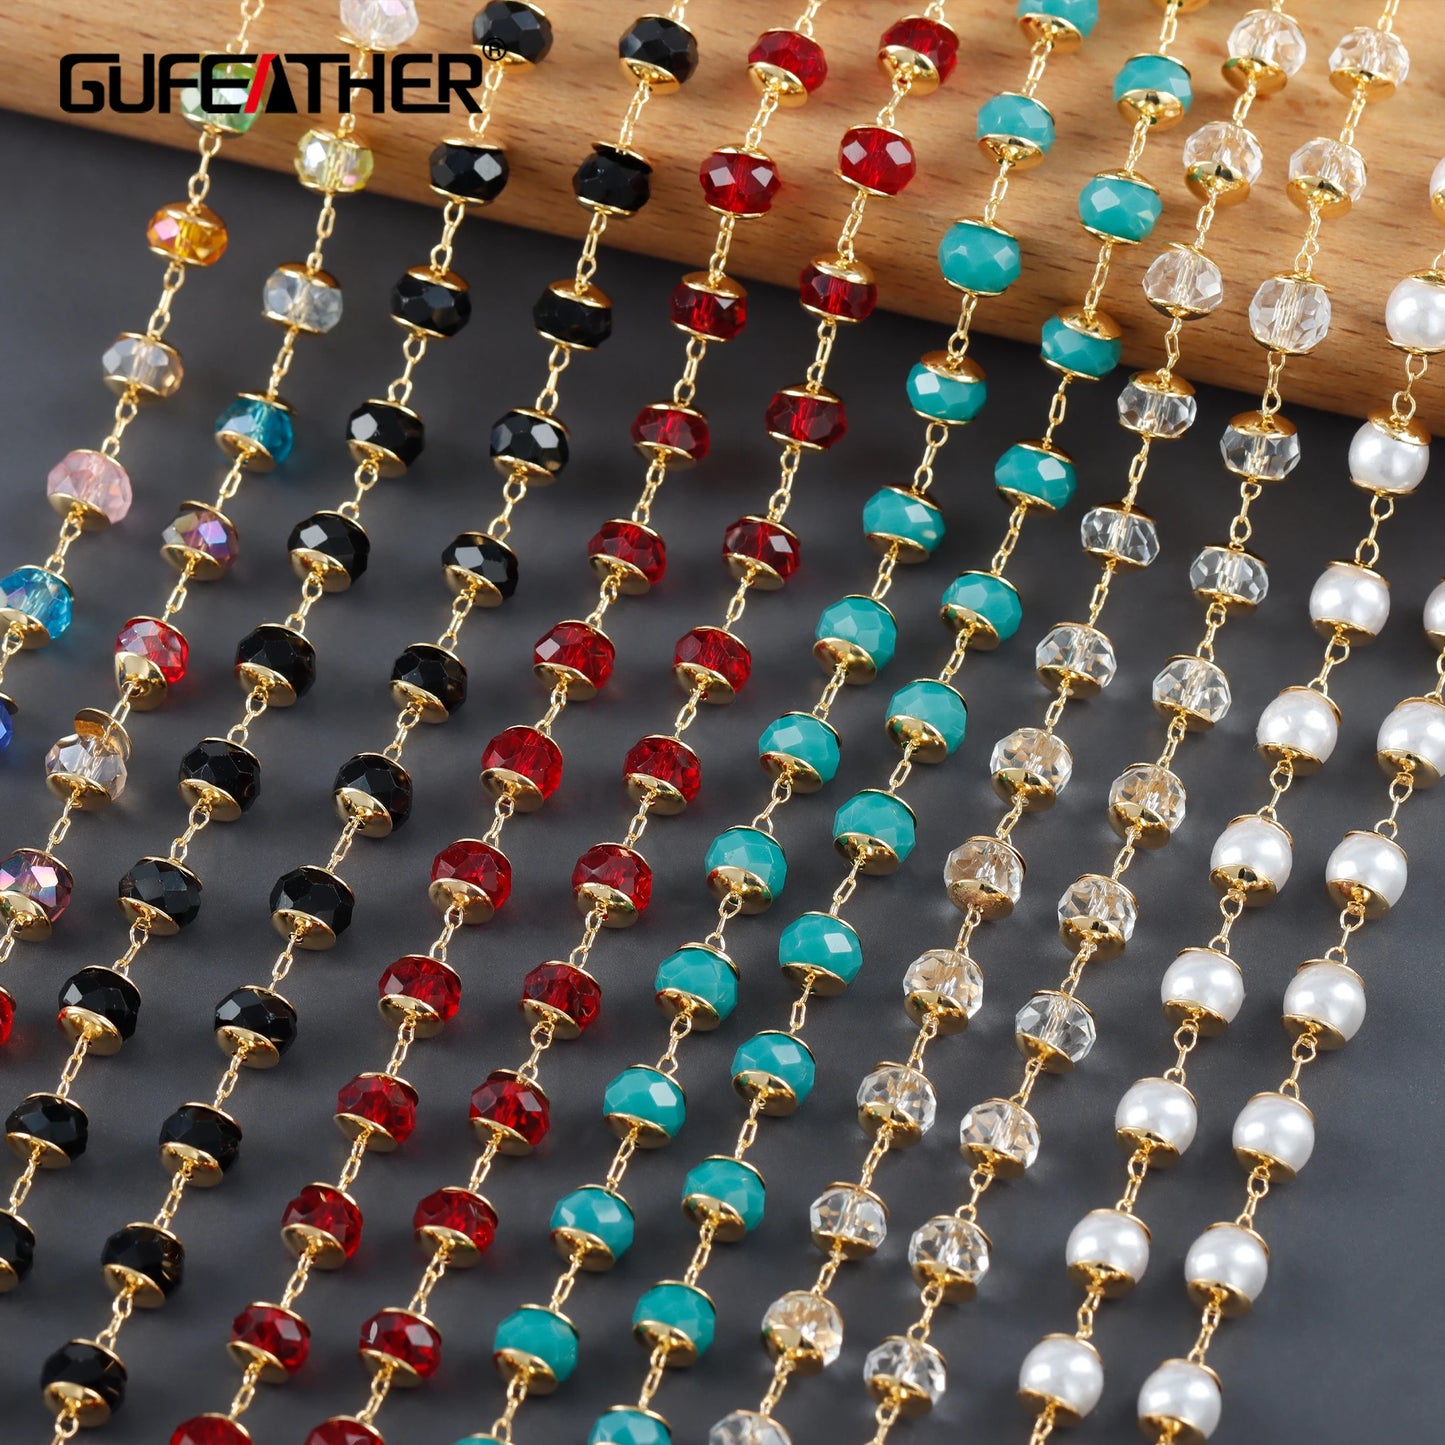 GUFEATHER C261,diy chain,18k gold plated,copper,glass,nickel free,jewelry findings,diy bracelet necklace,jewelry making,1m/lot